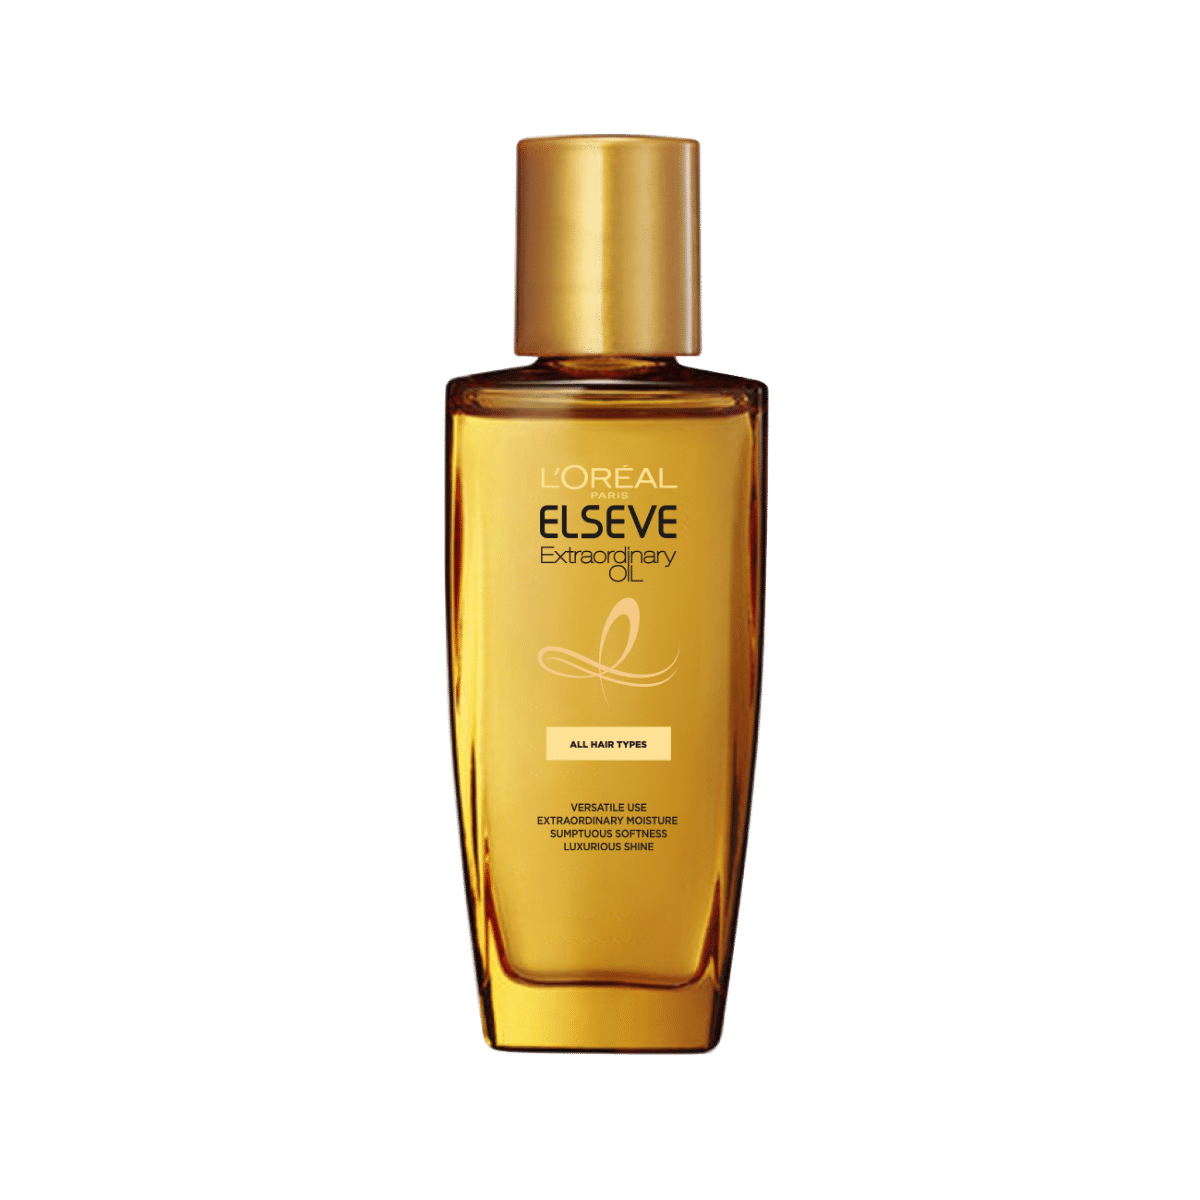 Loreal Elseve Extraordinary Oil Serum, 30 ml Price, Uses, Side Effects,  Composition - Apollo Pharmacy